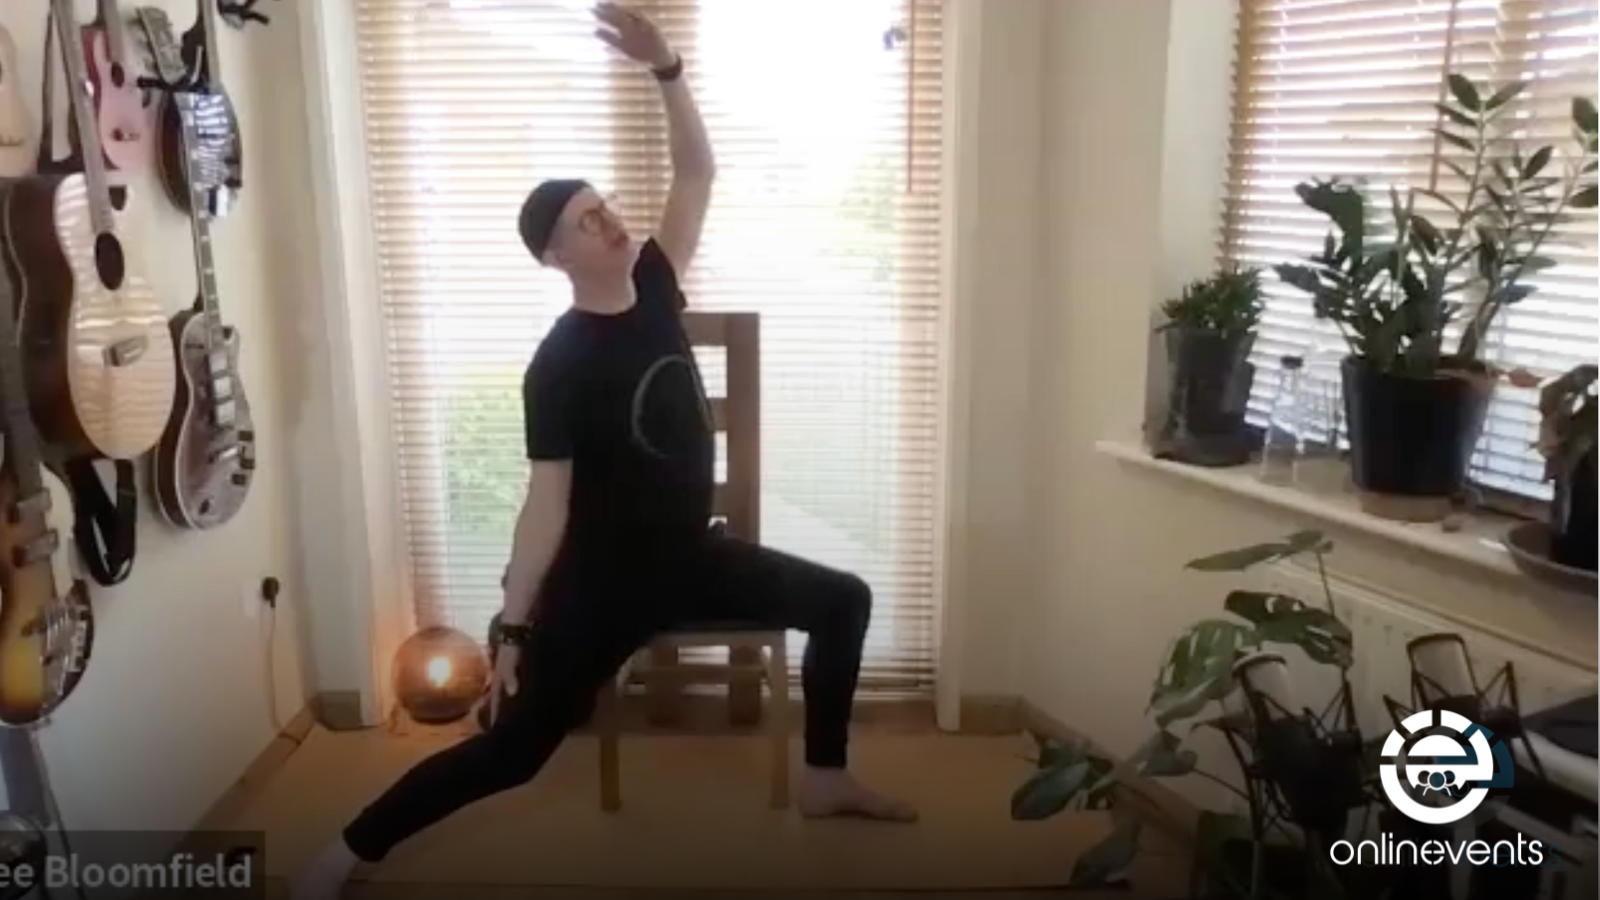 De-Desk Yourself! Chair Yoga and Breathwork Workshop with Lee Bloomfield (2nd May 2024)